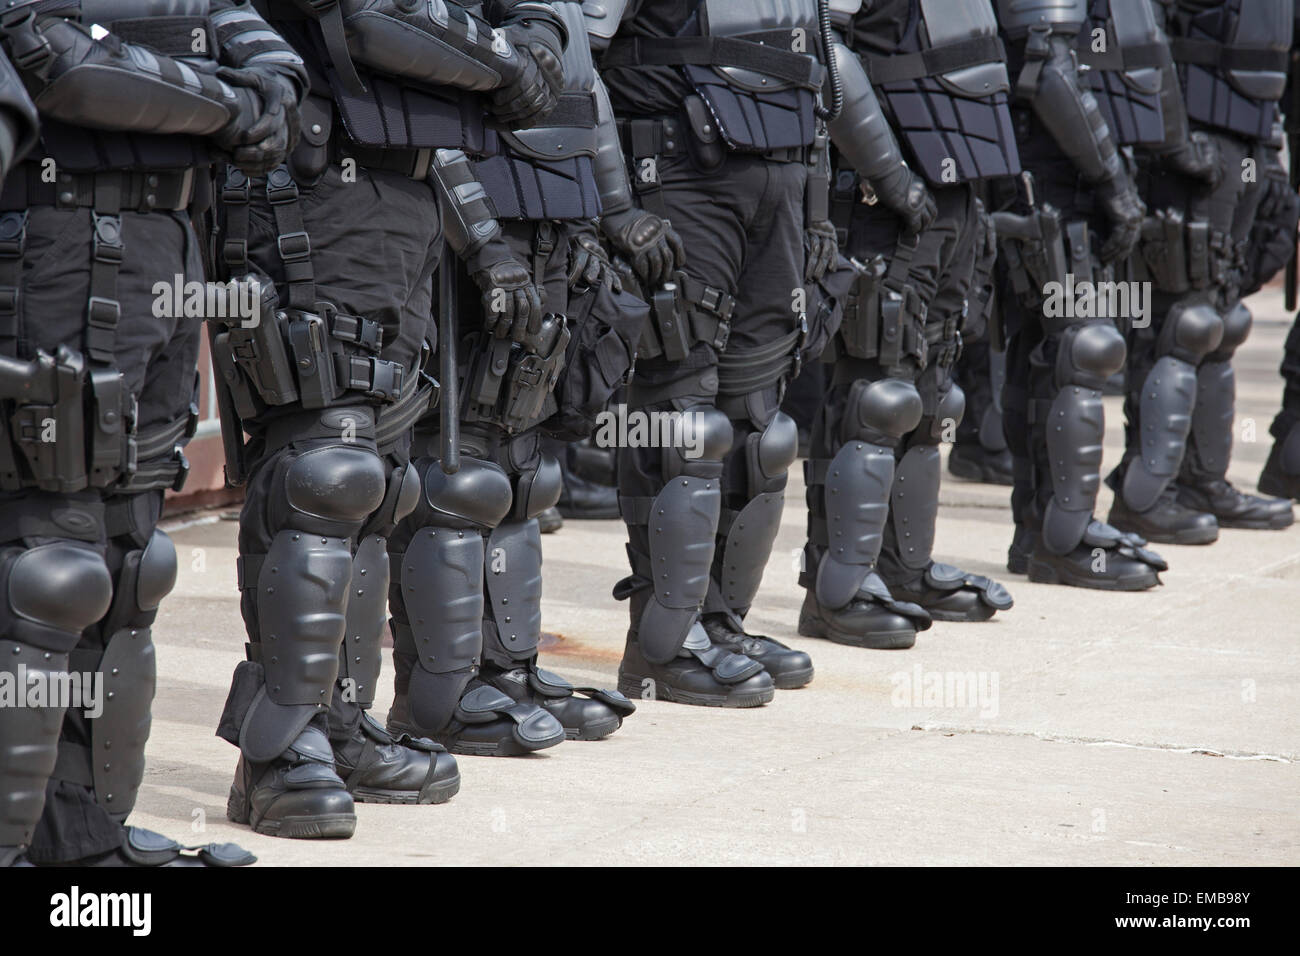 Toledo, Ohio - Police in riot gear protected members of the neo-Nazi National Socialist Movement as they held a public rally. Stock Photo